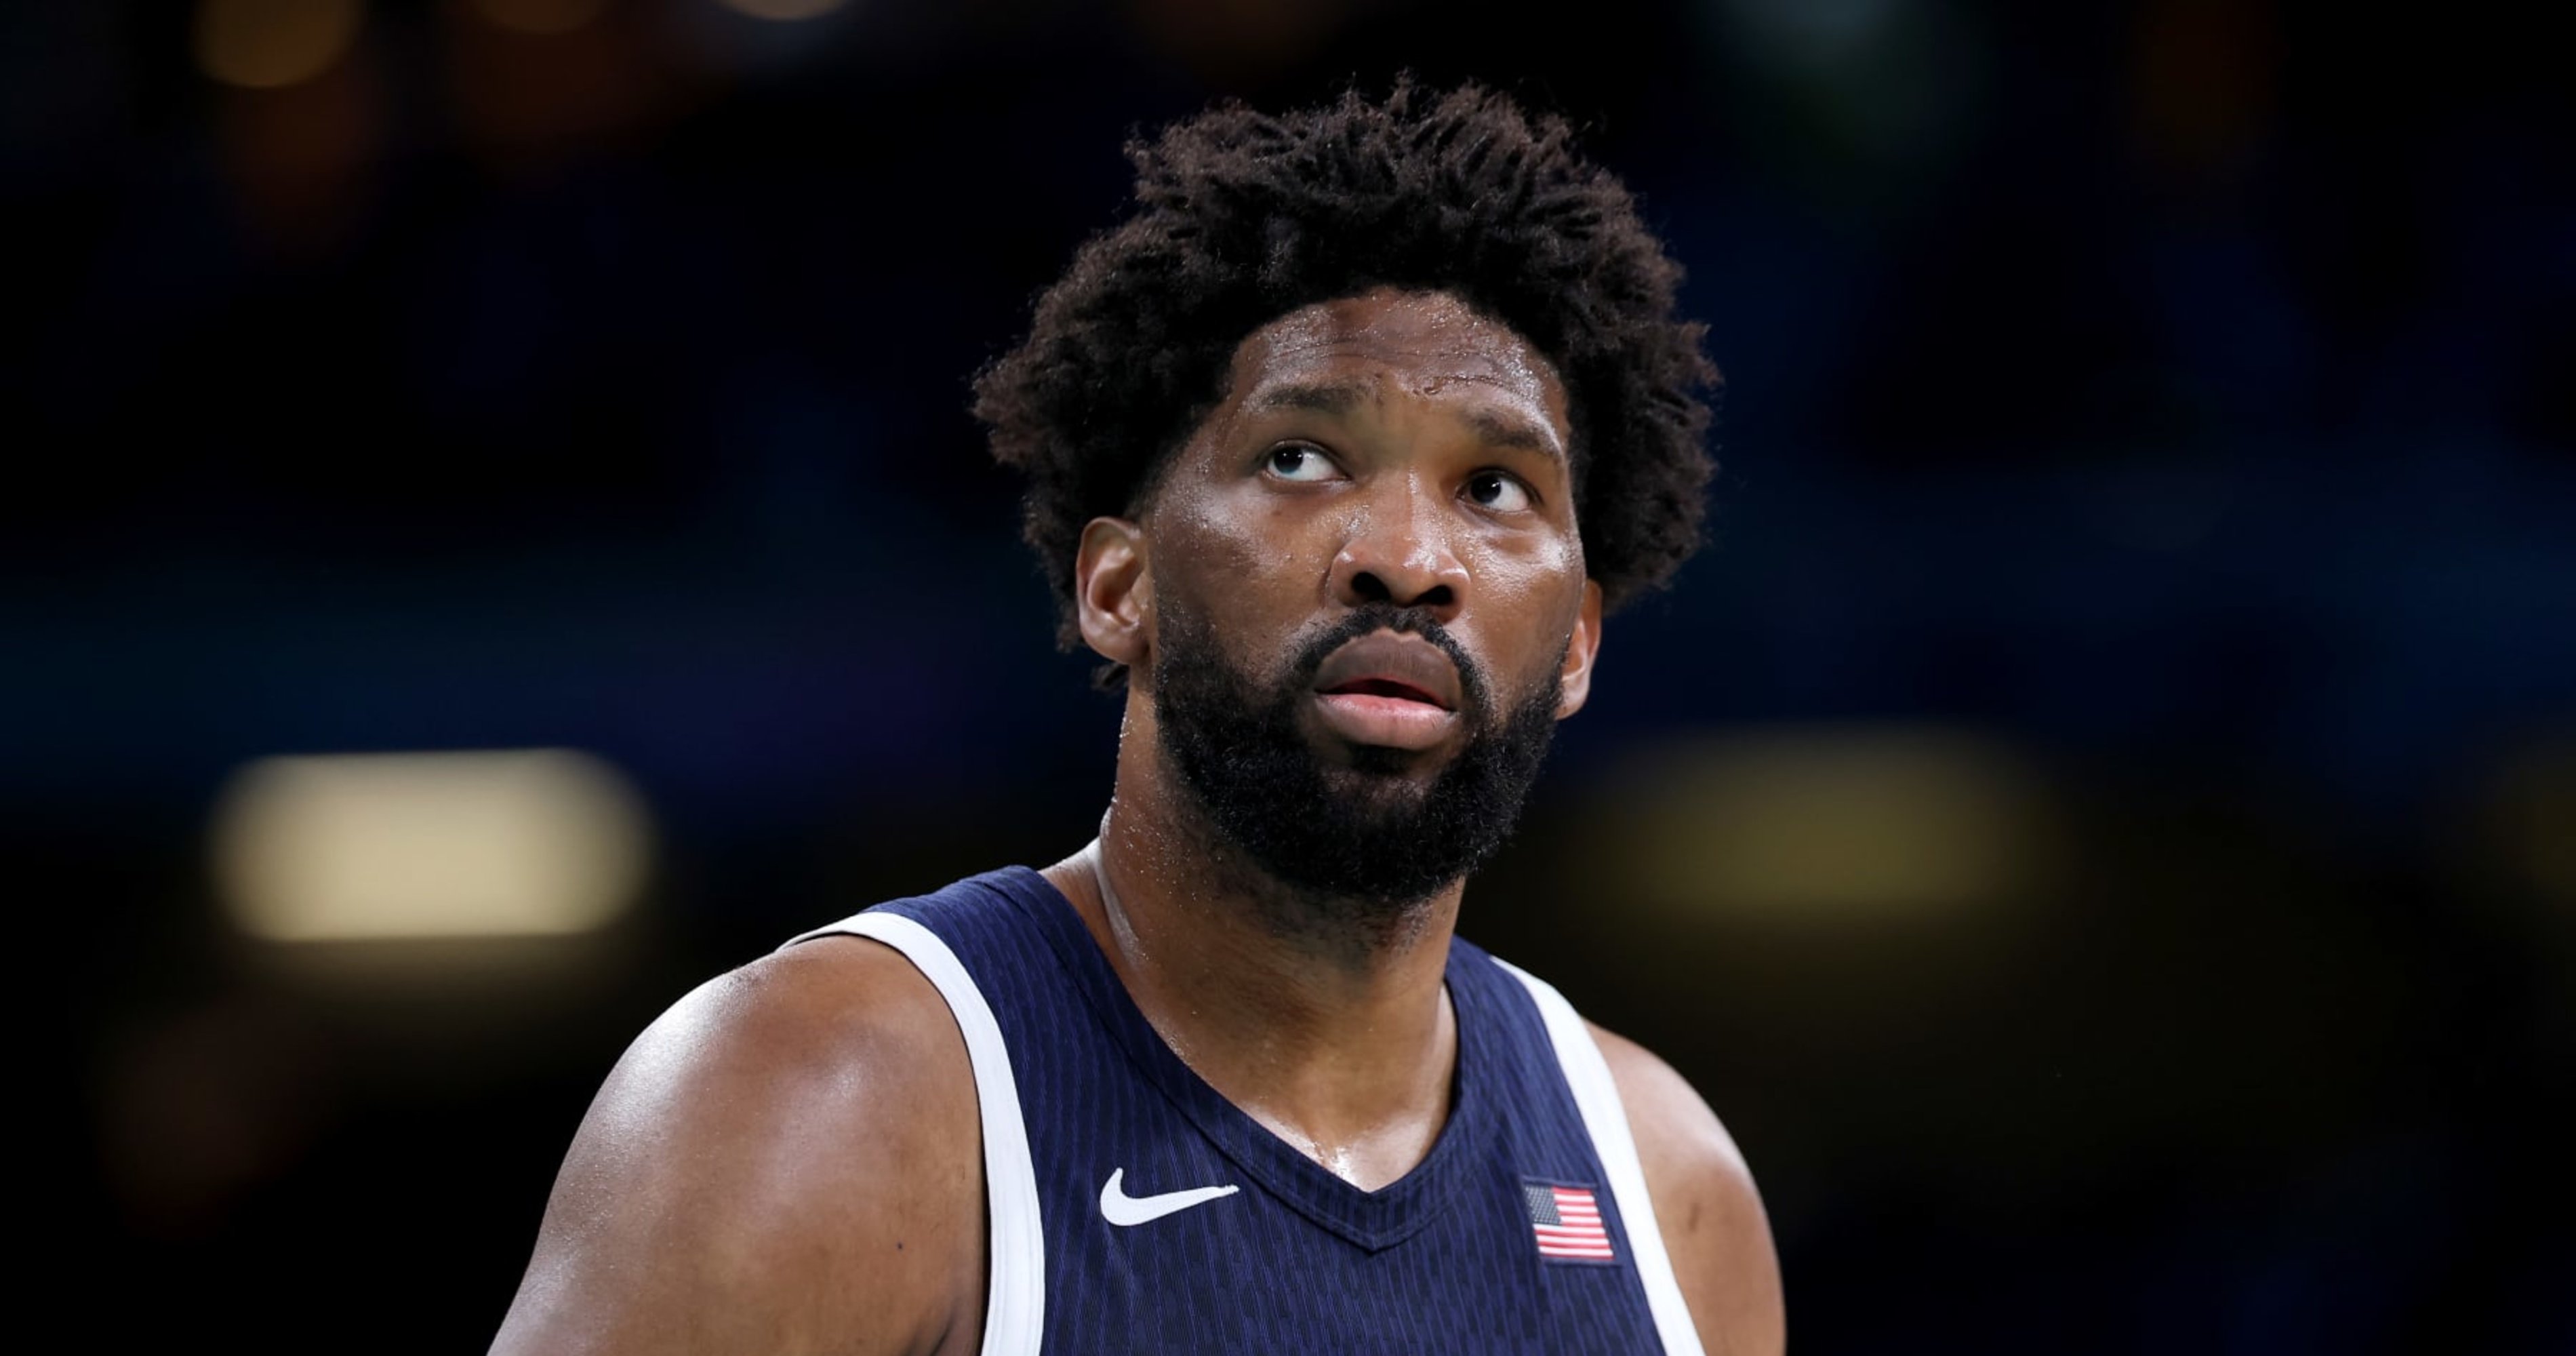 Joel Embiid Says He Chose USA over France Because They 'Wanted Me'; Talks Fans Booing